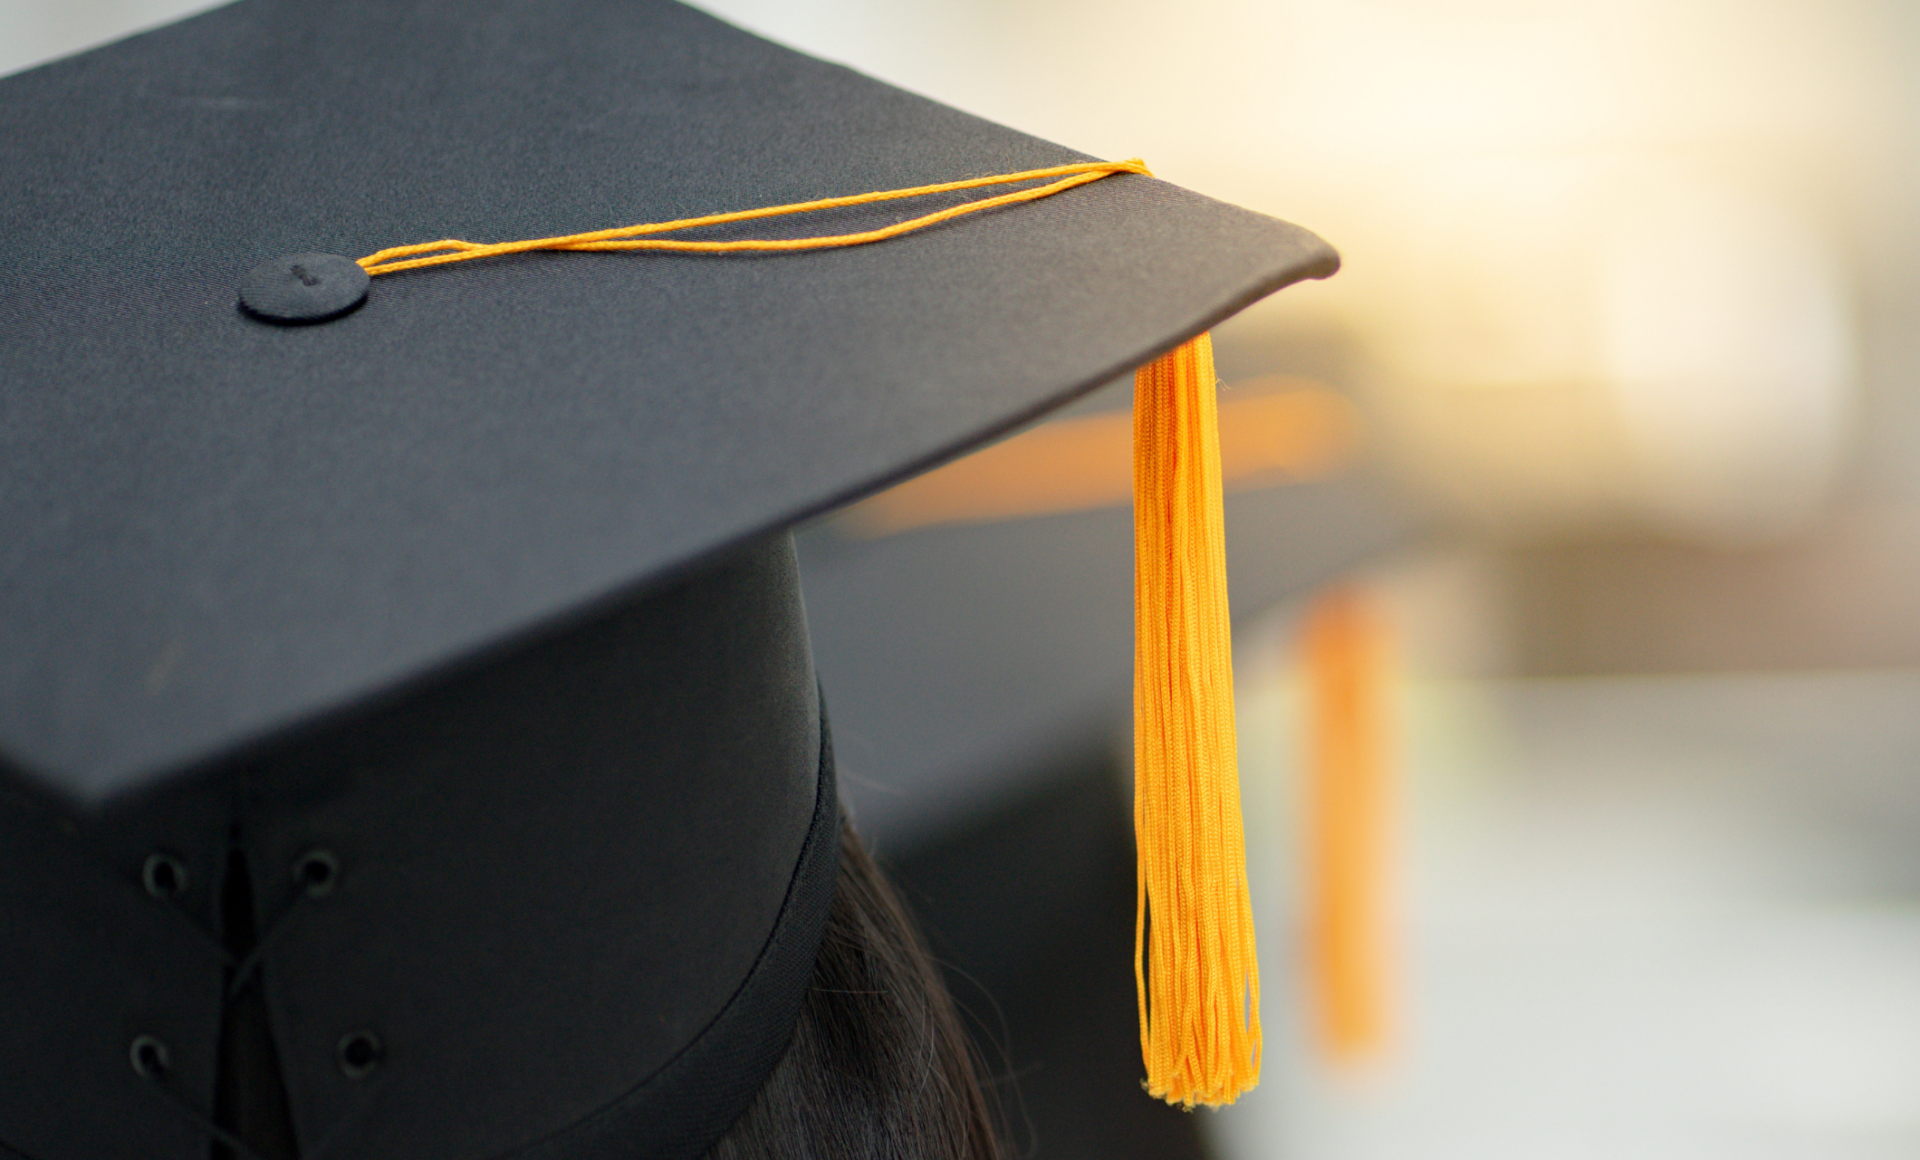 close-up of individual wearing graduation cap, viewpoint is behind the person